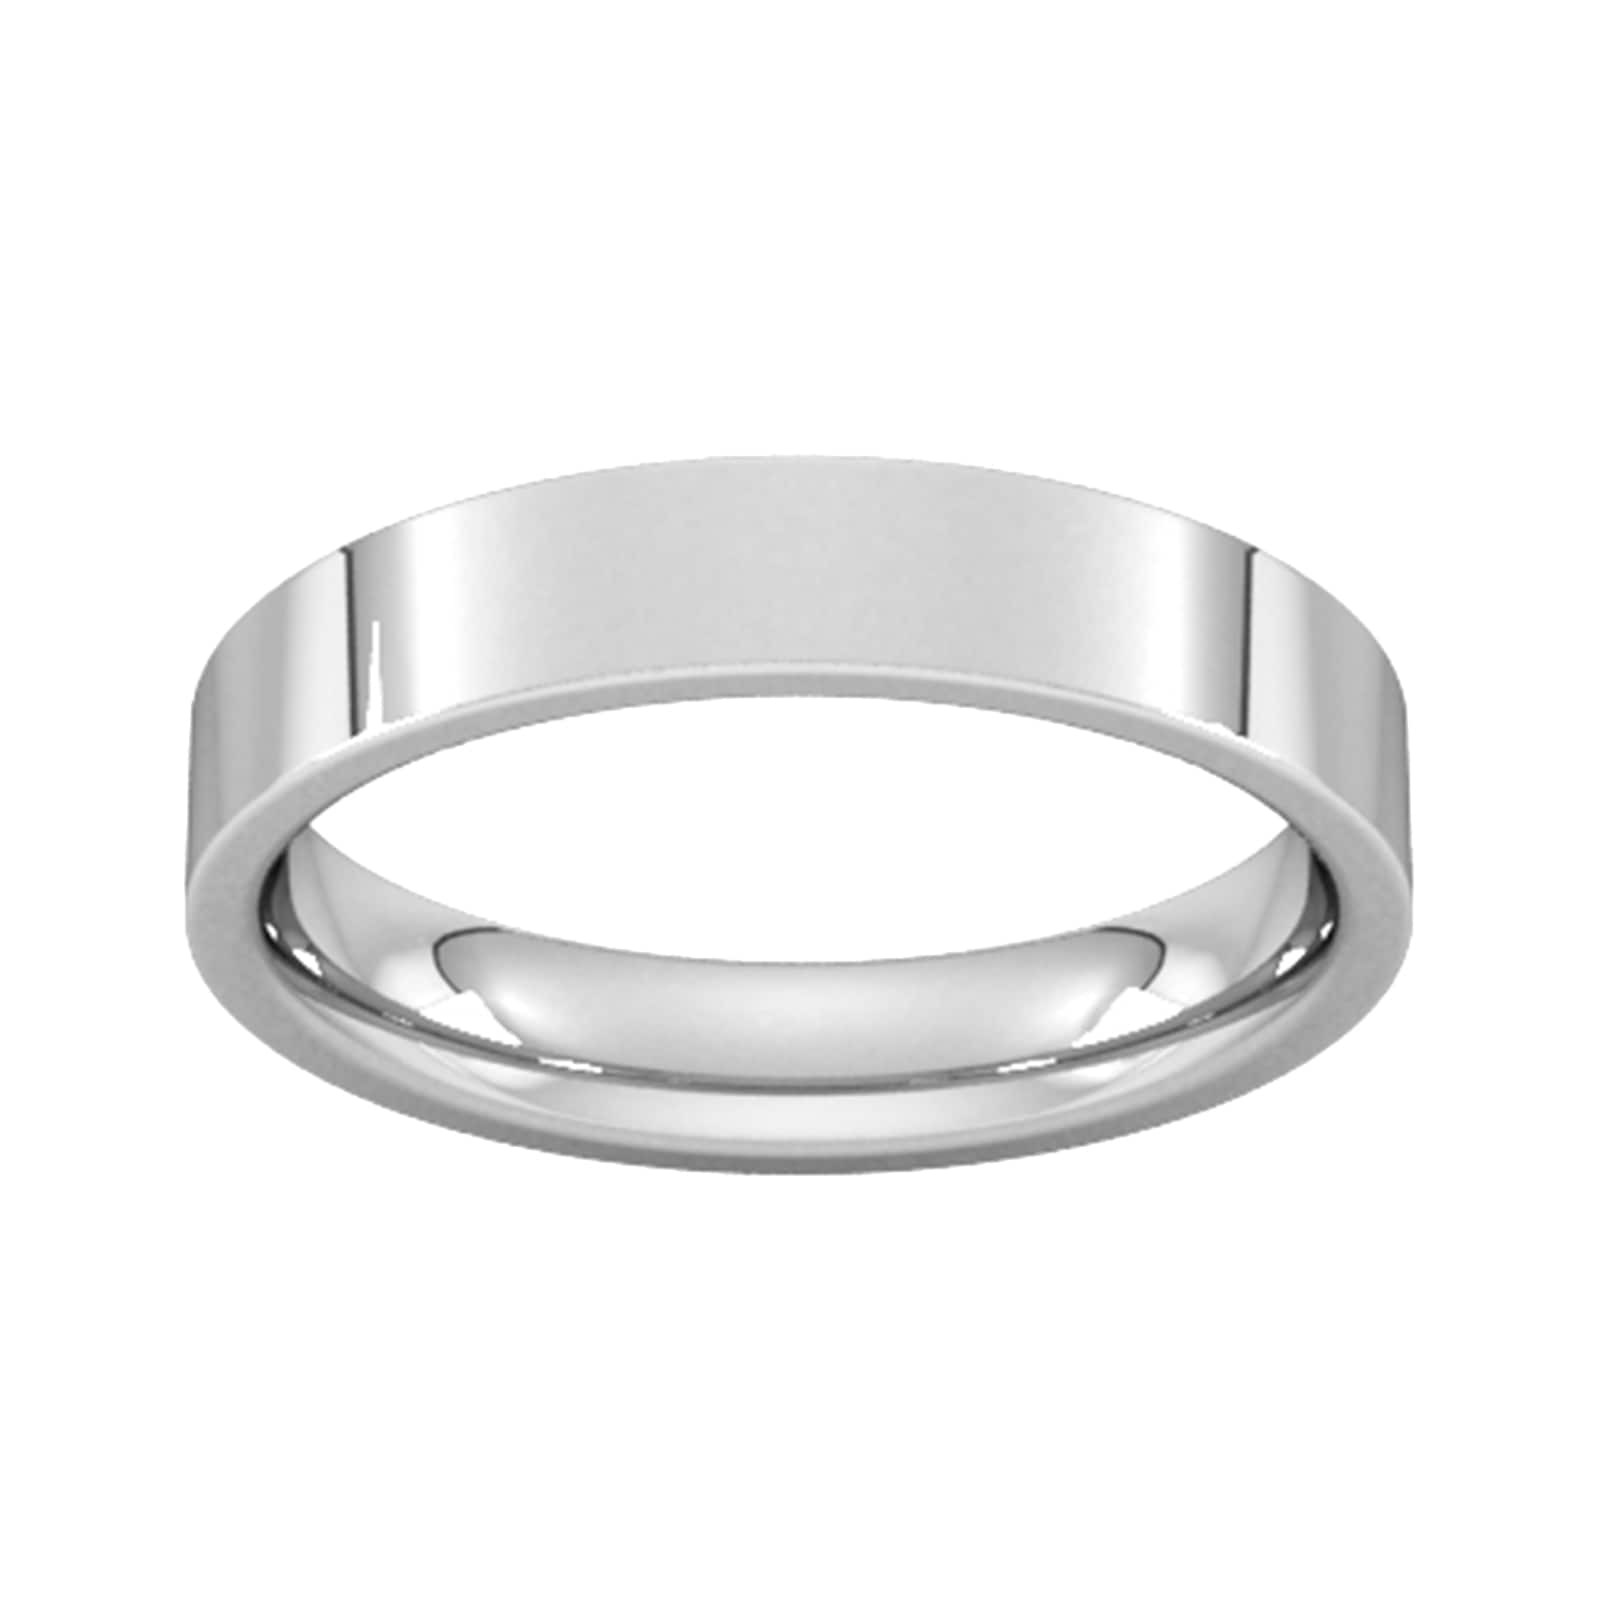 4mm Flat Court Heavy Wedding Ring In 18 Carat White Gold - Ring Size M